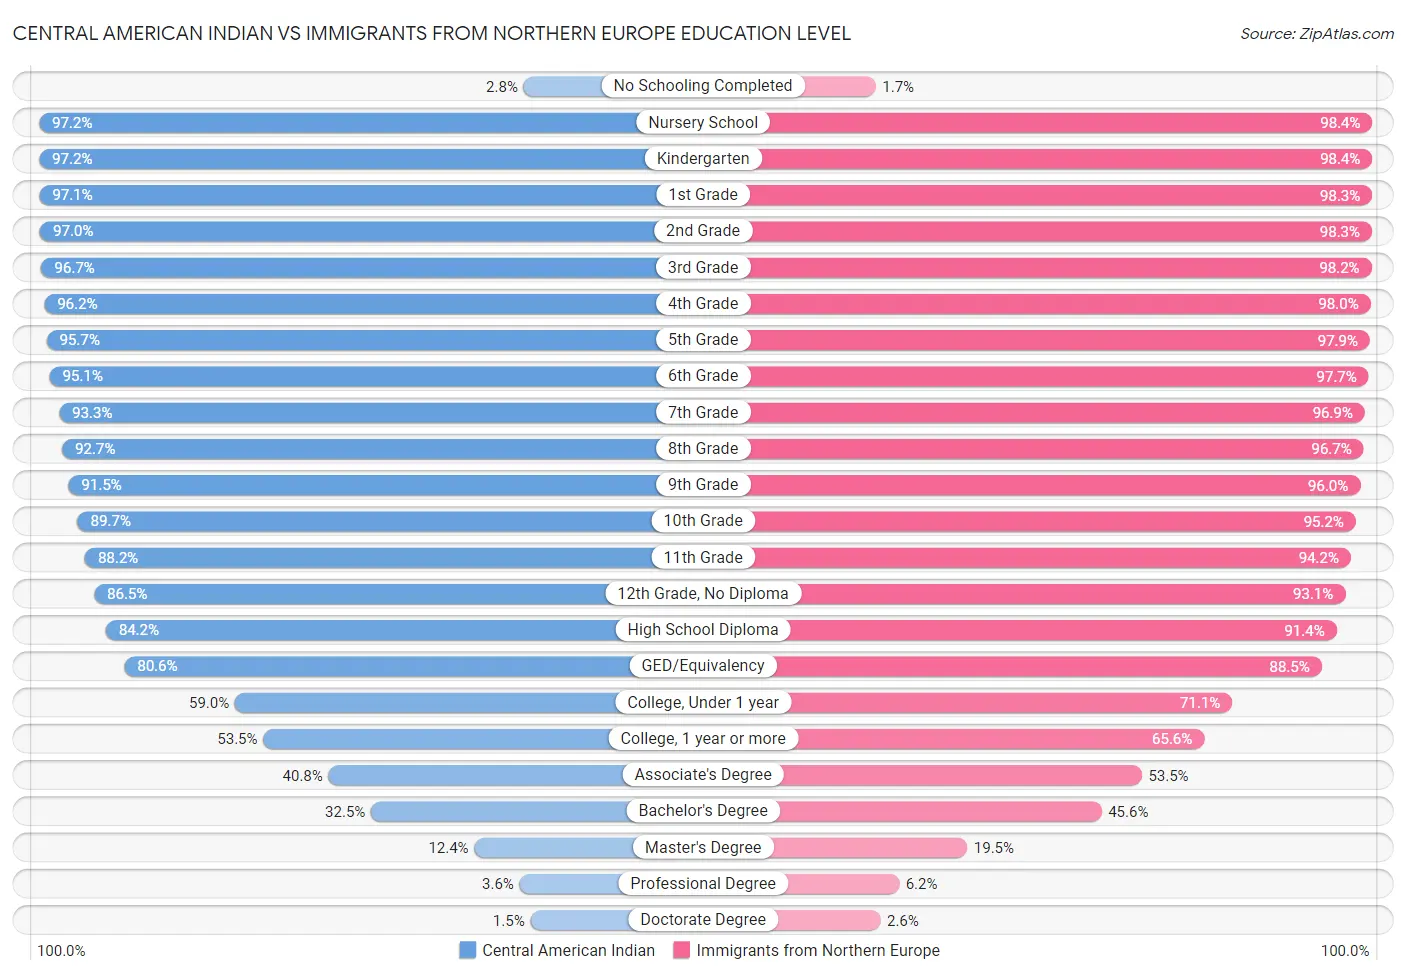 Central American Indian vs Immigrants from Northern Europe Education Level